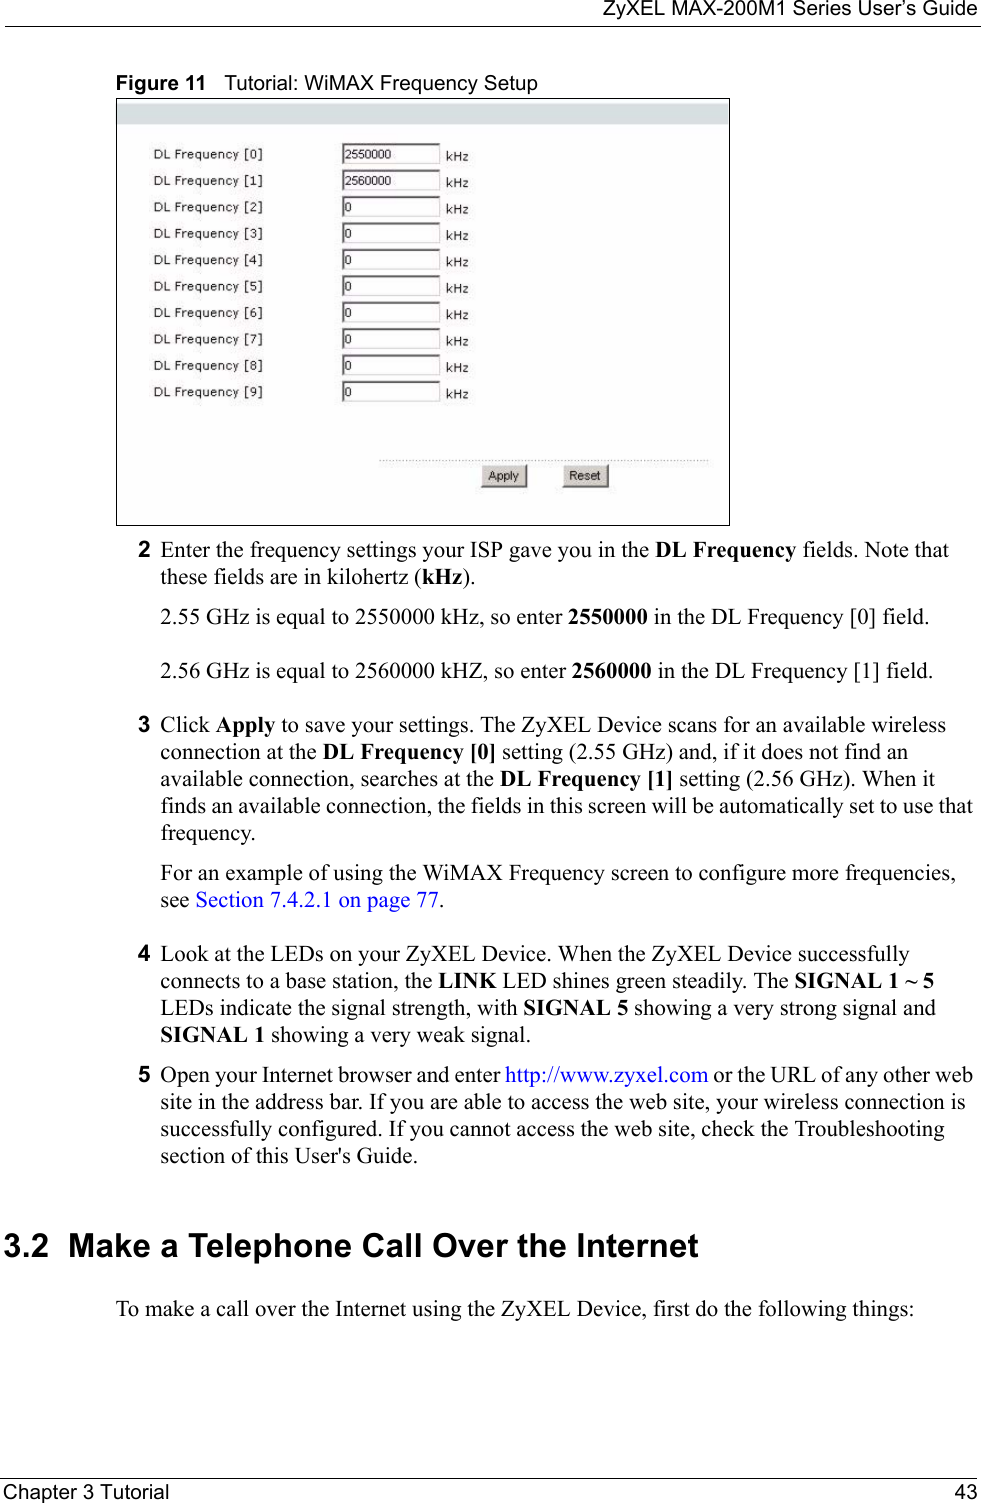 ZyXEL MAX-200M1 Series User’s GuideChapter 3 Tutorial 43Figure 11   Tutorial: WiMAX Frequency Setup2Enter the frequency settings your ISP gave you in the DL Frequency fields. Note that these fields are in kilohertz (kHz).  2.55 GHz is equal to 2550000 kHz, so enter 2550000 in the DL Frequency [0] field.2.56 GHz is equal to 2560000 kHZ, so enter 2560000 in the DL Frequency [1] field.3Click Apply to save your settings. The ZyXEL Device scans for an available wireless connection at the DL Frequency [0] setting (2.55 GHz) and, if it does not find an available connection, searches at the DL Frequency [1] setting (2.56 GHz). When it finds an available connection, the fields in this screen will be automatically set to use that frequency.For an example of using the WiMAX Frequency screen to configure more frequencies, see Section 7.4.2.1 on page 77.4Look at the LEDs on your ZyXEL Device. When the ZyXEL Device successfully connects to a base station, the LINK LED shines green steadily. The SIGNAL 1 ~ 5 LEDs indicate the signal strength, with SIGNAL 5 showing a very strong signal and SIGNAL 1 showing a very weak signal.5Open your Internet browser and enter http://www.zyxel.com or the URL of any other web site in the address bar. If you are able to access the web site, your wireless connection is successfully configured. If you cannot access the web site, check the Troubleshooting section of this User&apos;s Guide.3.2  Make a Telephone Call Over the InternetTo make a call over the Internet using the ZyXEL Device, first do the following things: